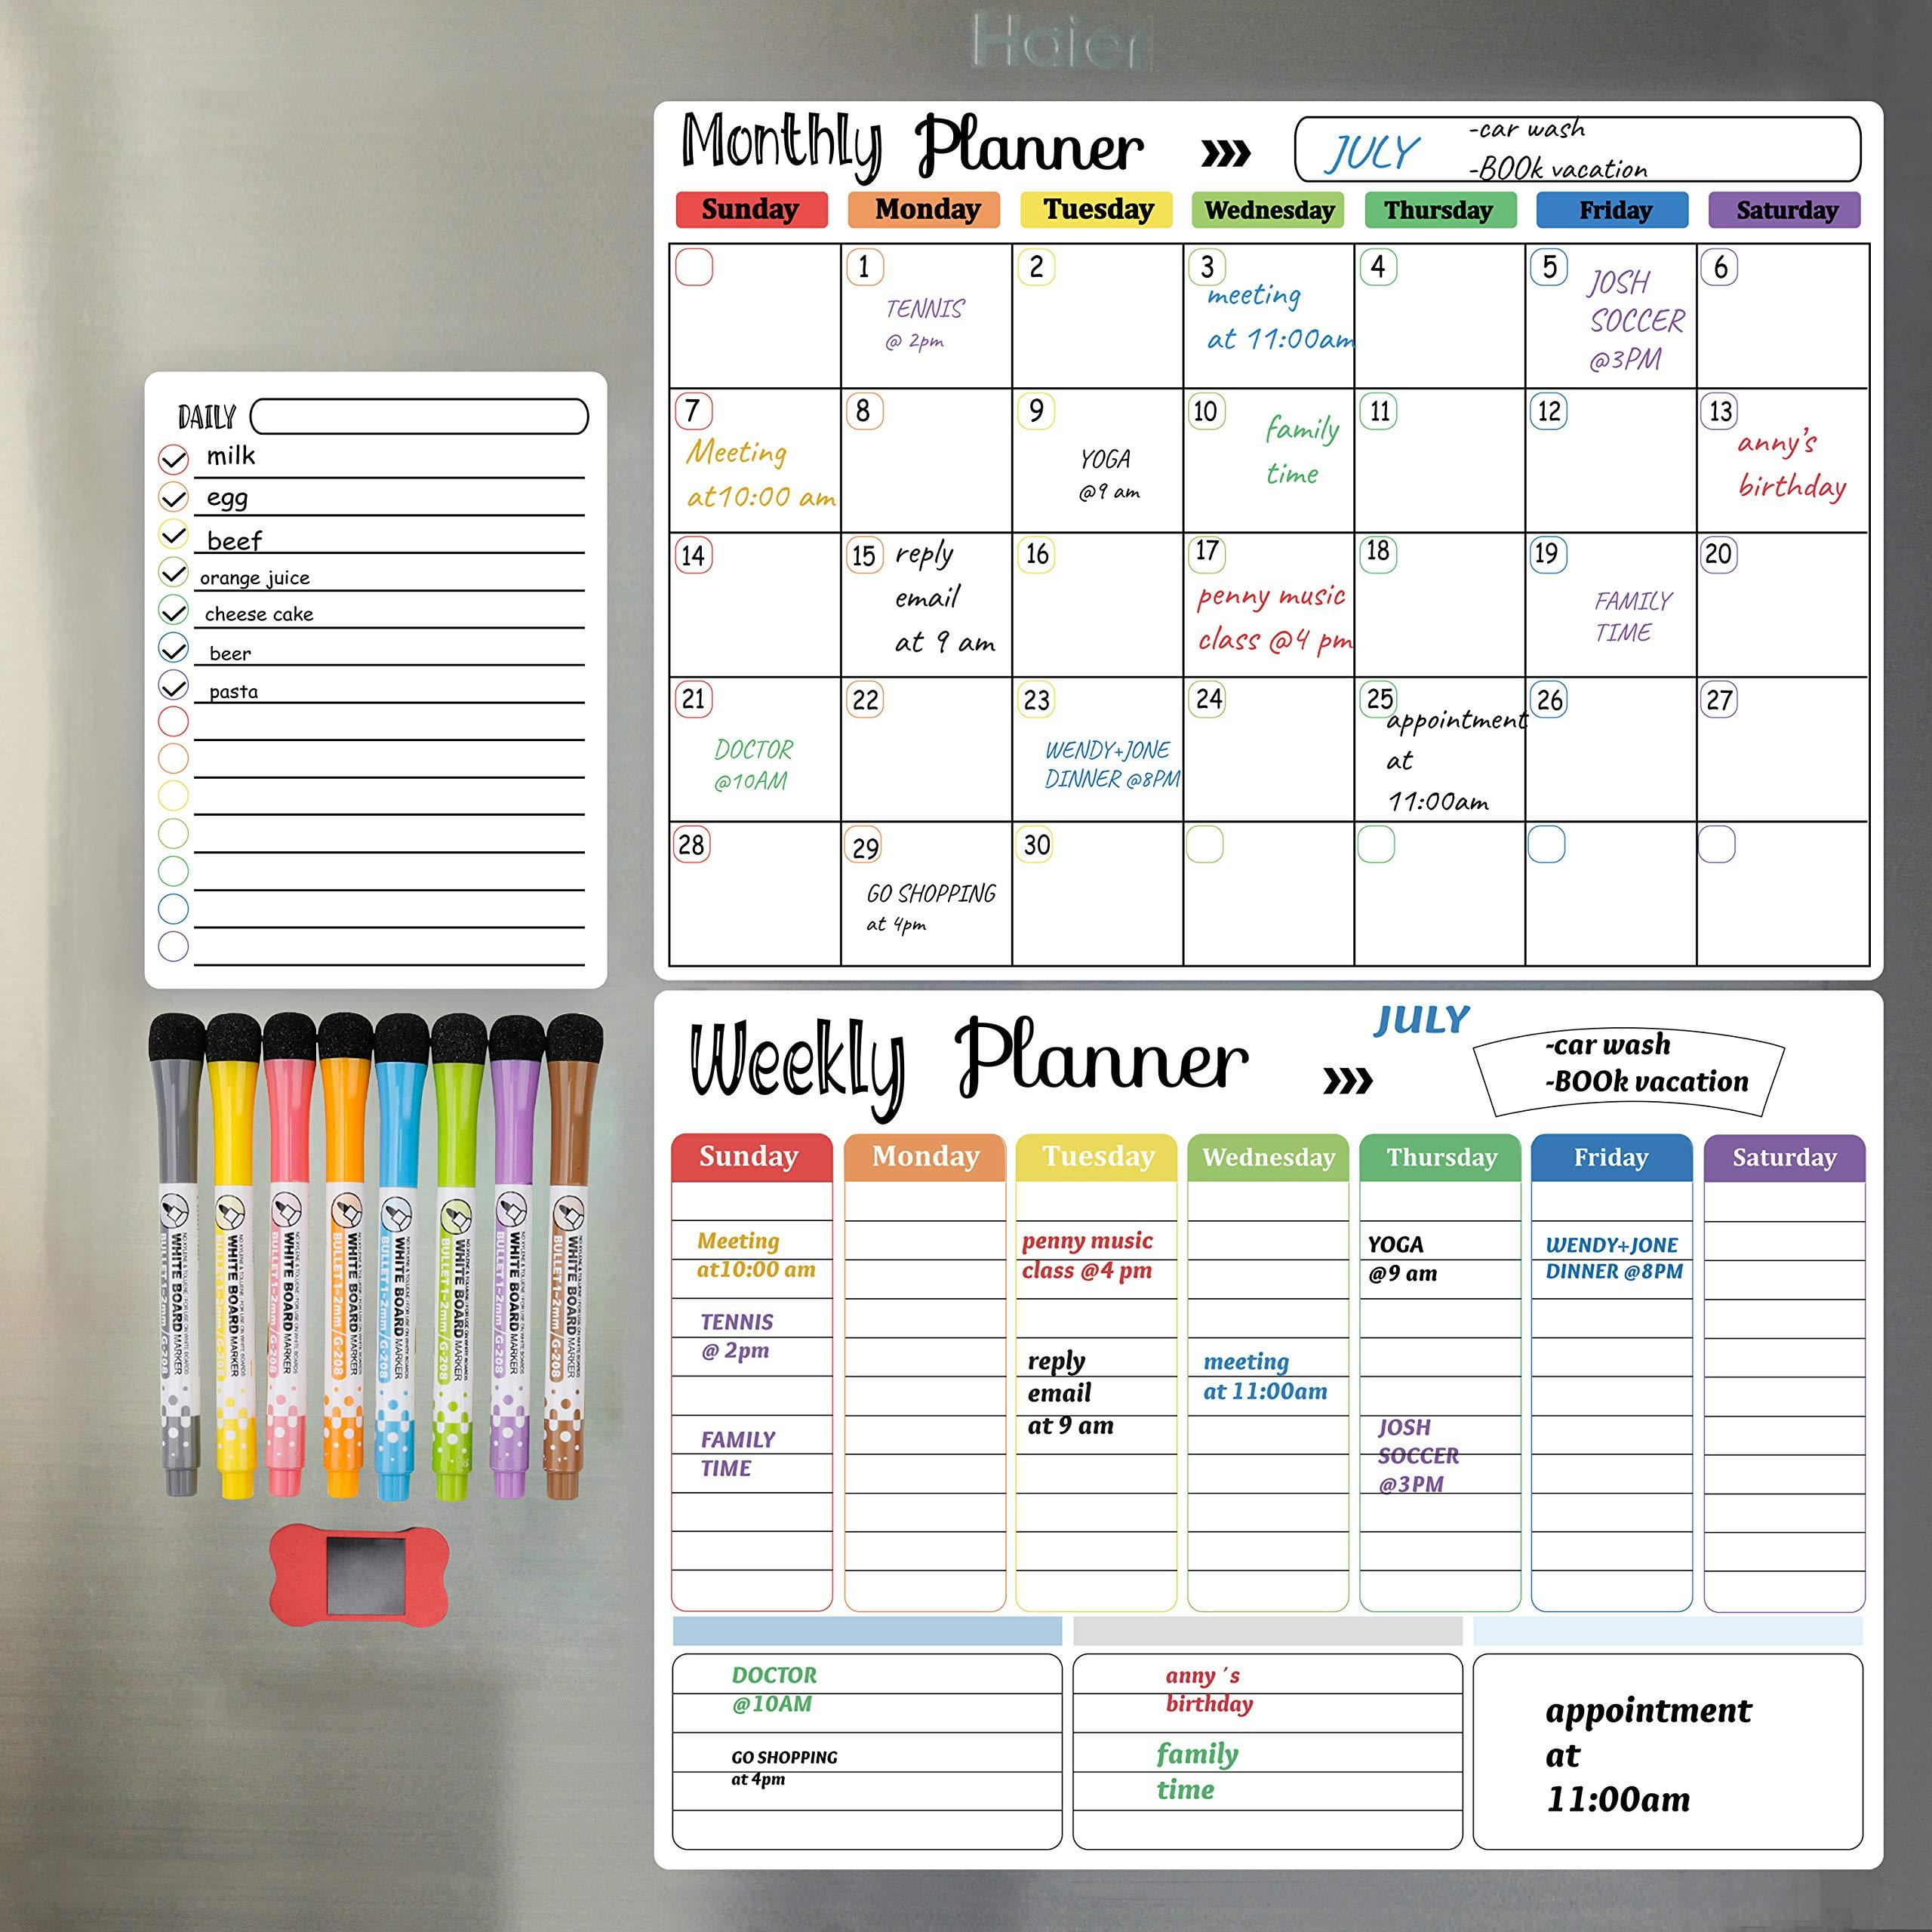 Magnetic Refrigerator White Board Planner for organizing activities Dry Erase White Board Fridge Calendar by My Tidy Family Whiteboard planner calendar with magnetic back for daily organization